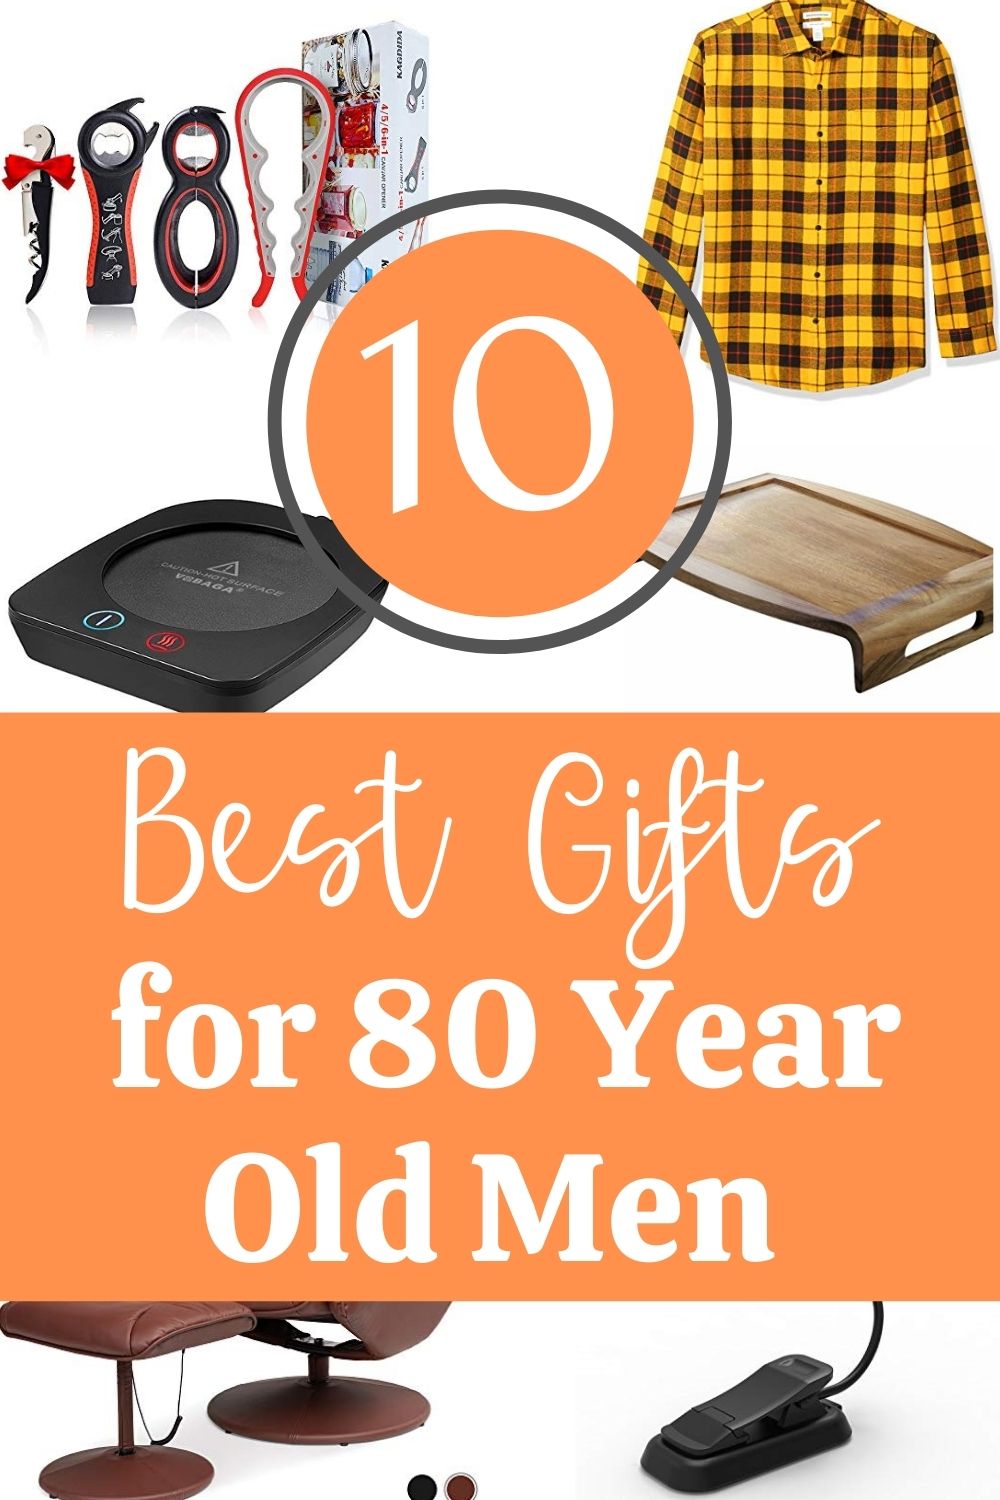 Popular Gift Ideas for 80 Year Old Man in 2020 | GiftCollector